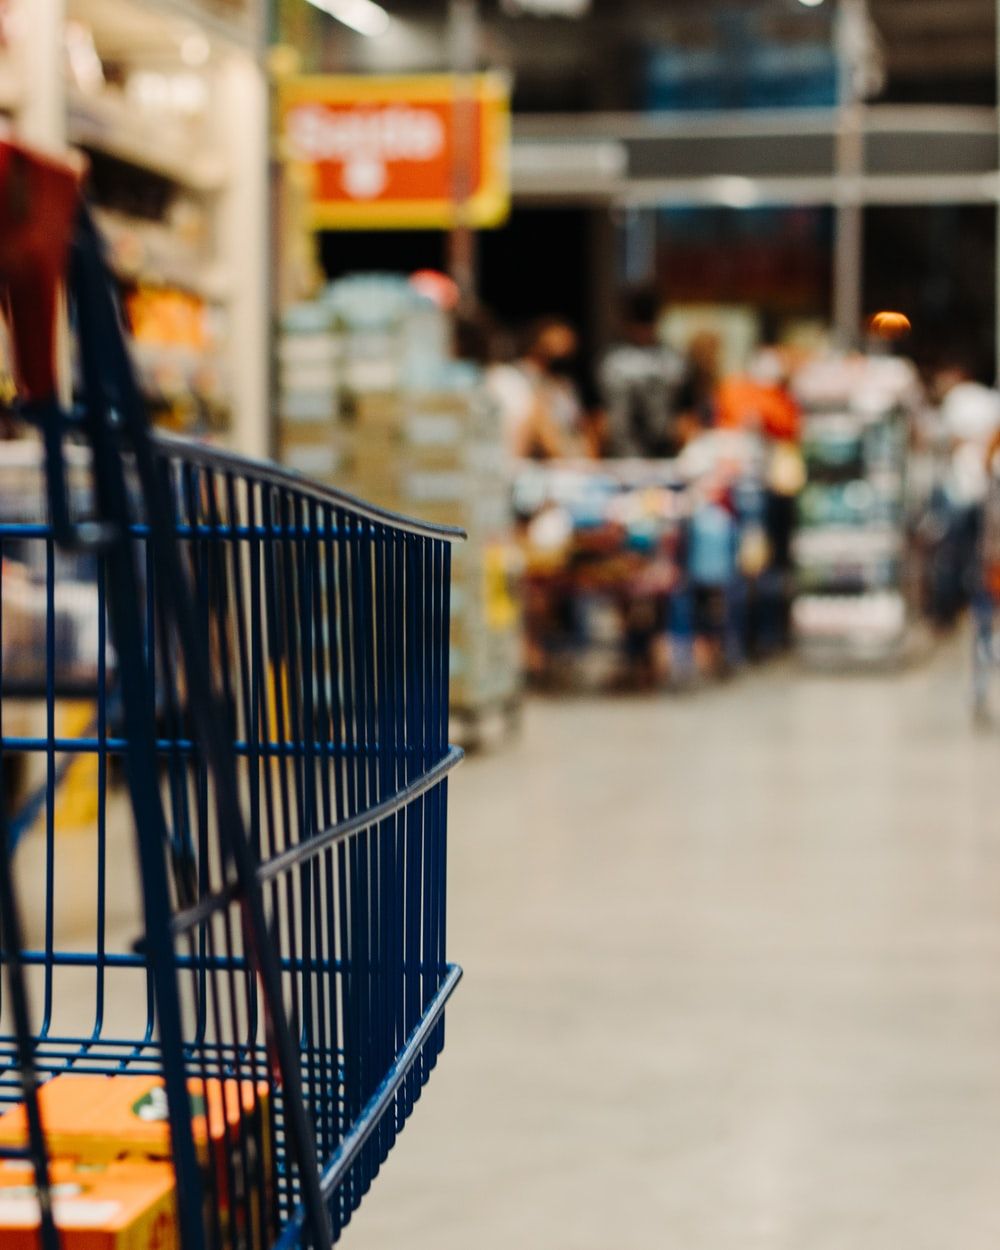 Grocery Cart Picture. Download Free Image